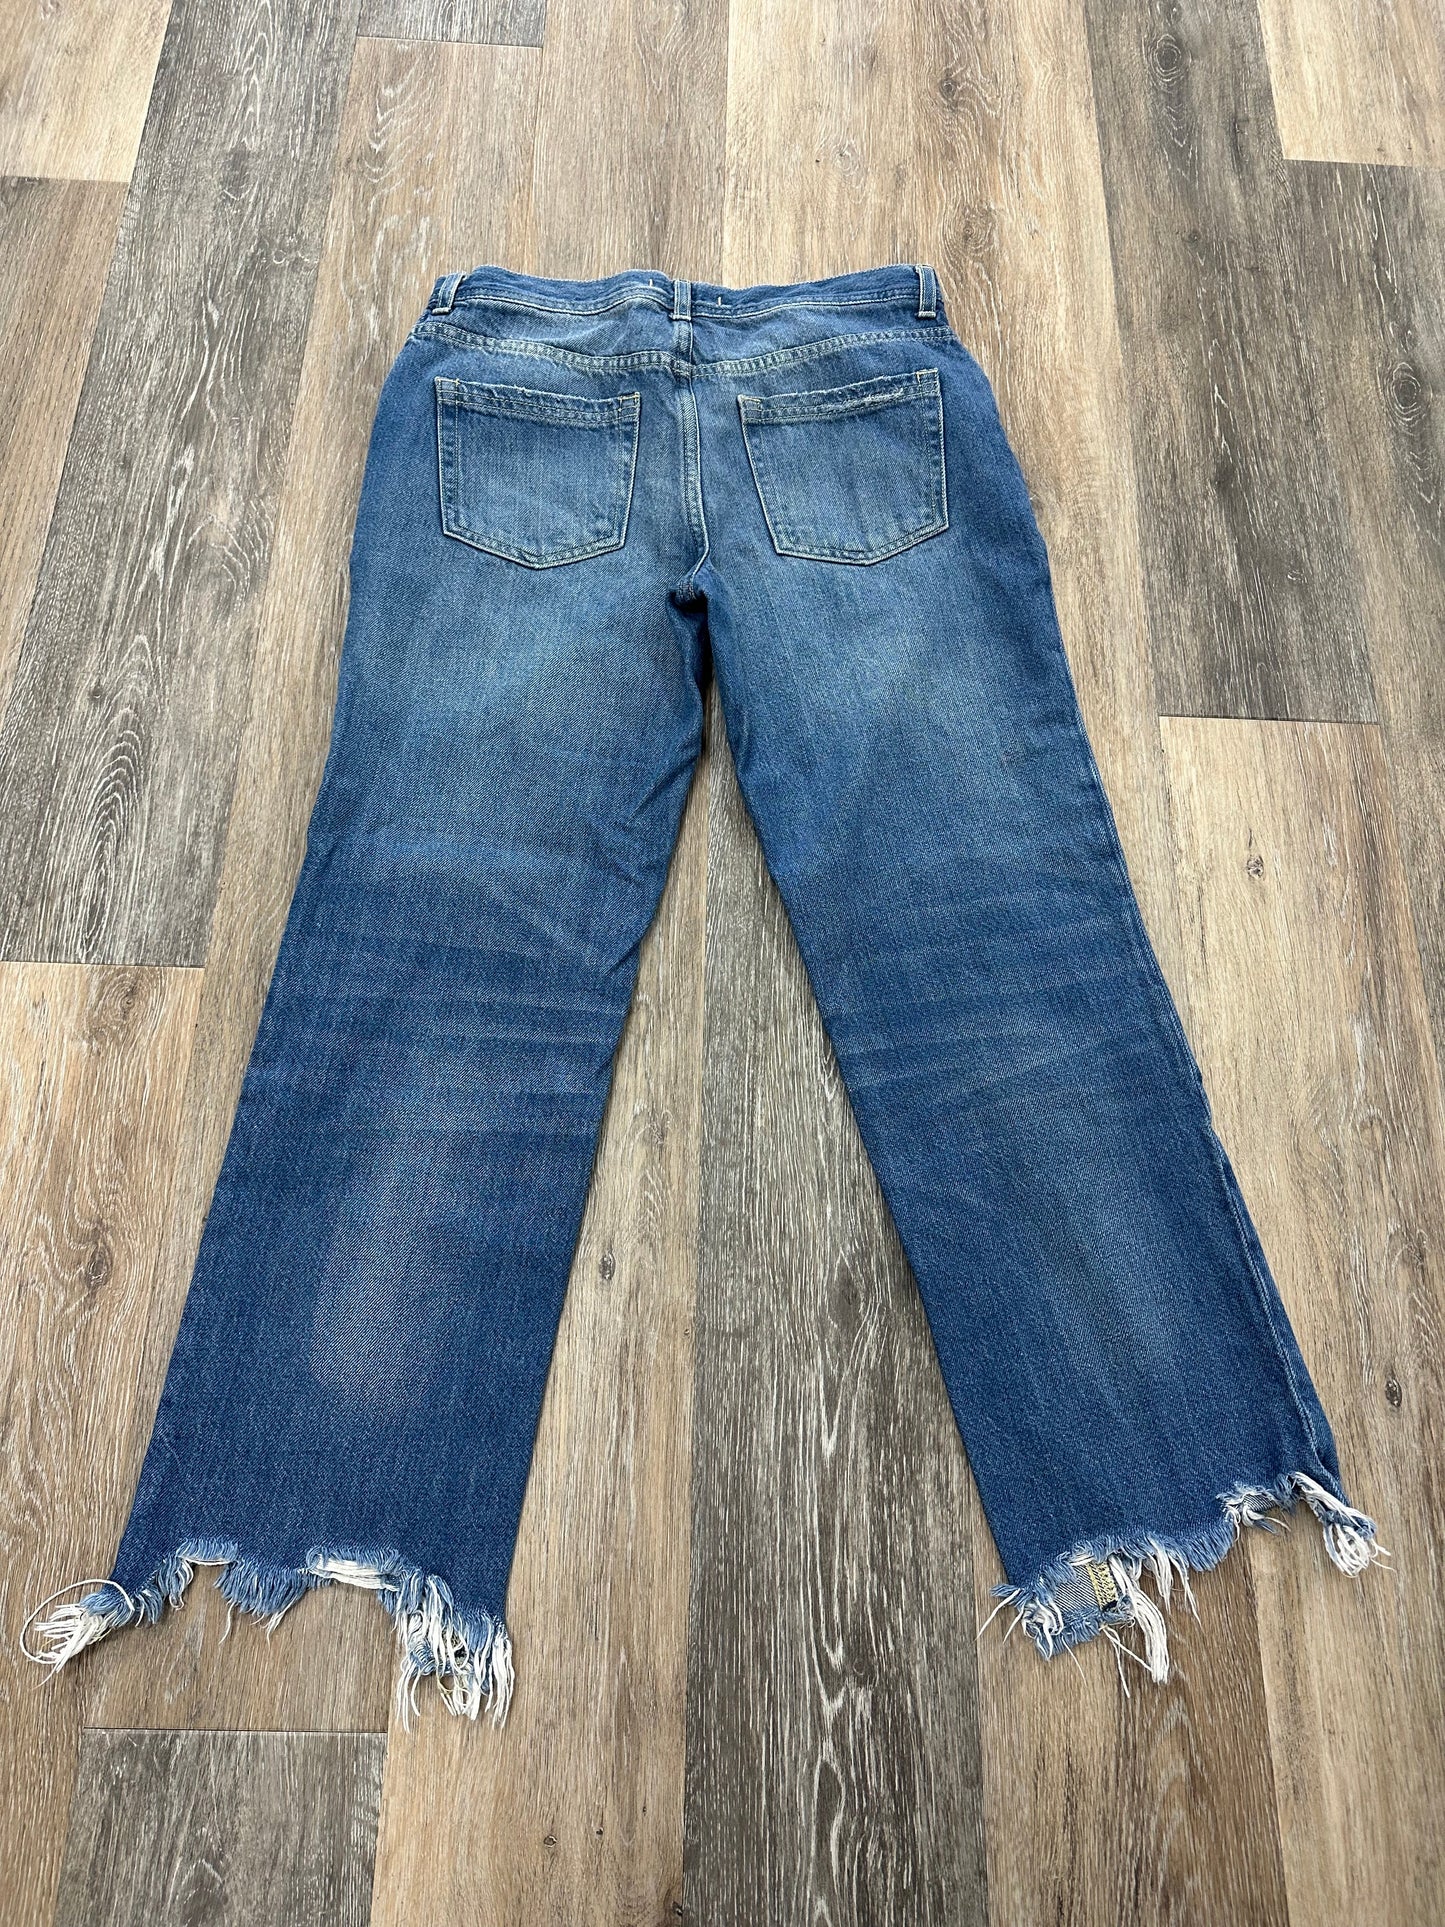 Jeans Relaxed/boyfriend By We The Free  Size: 4